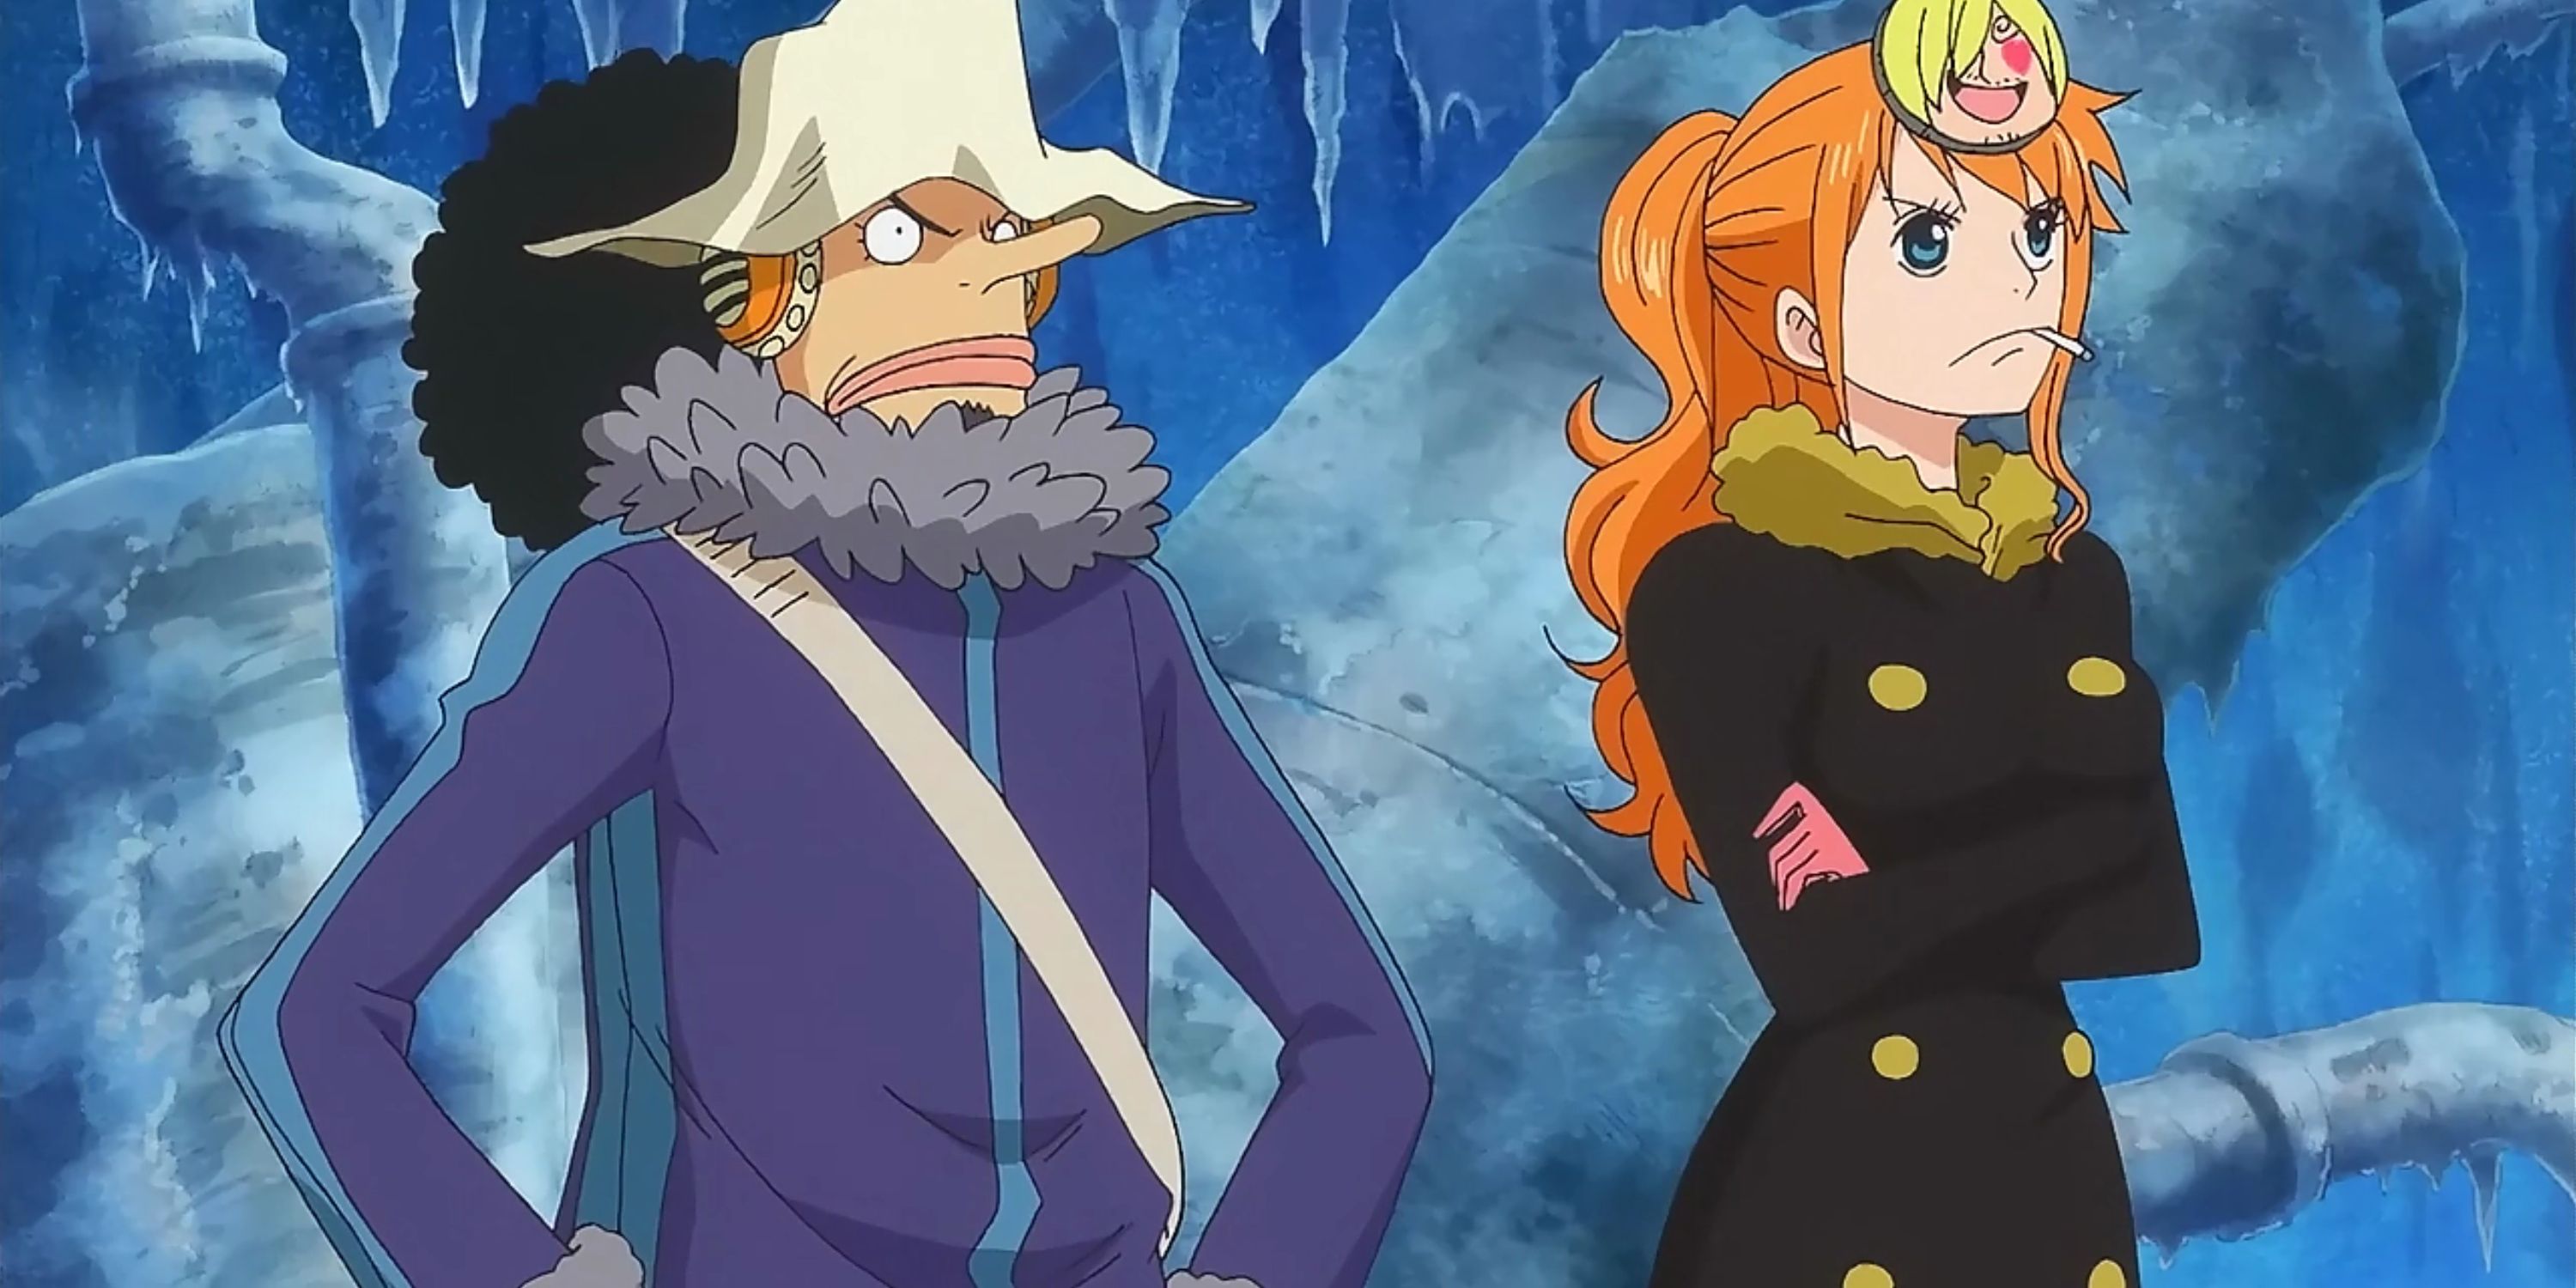 Usopp and Nami don their new outfits during One Piece's Punk Hazard Arc